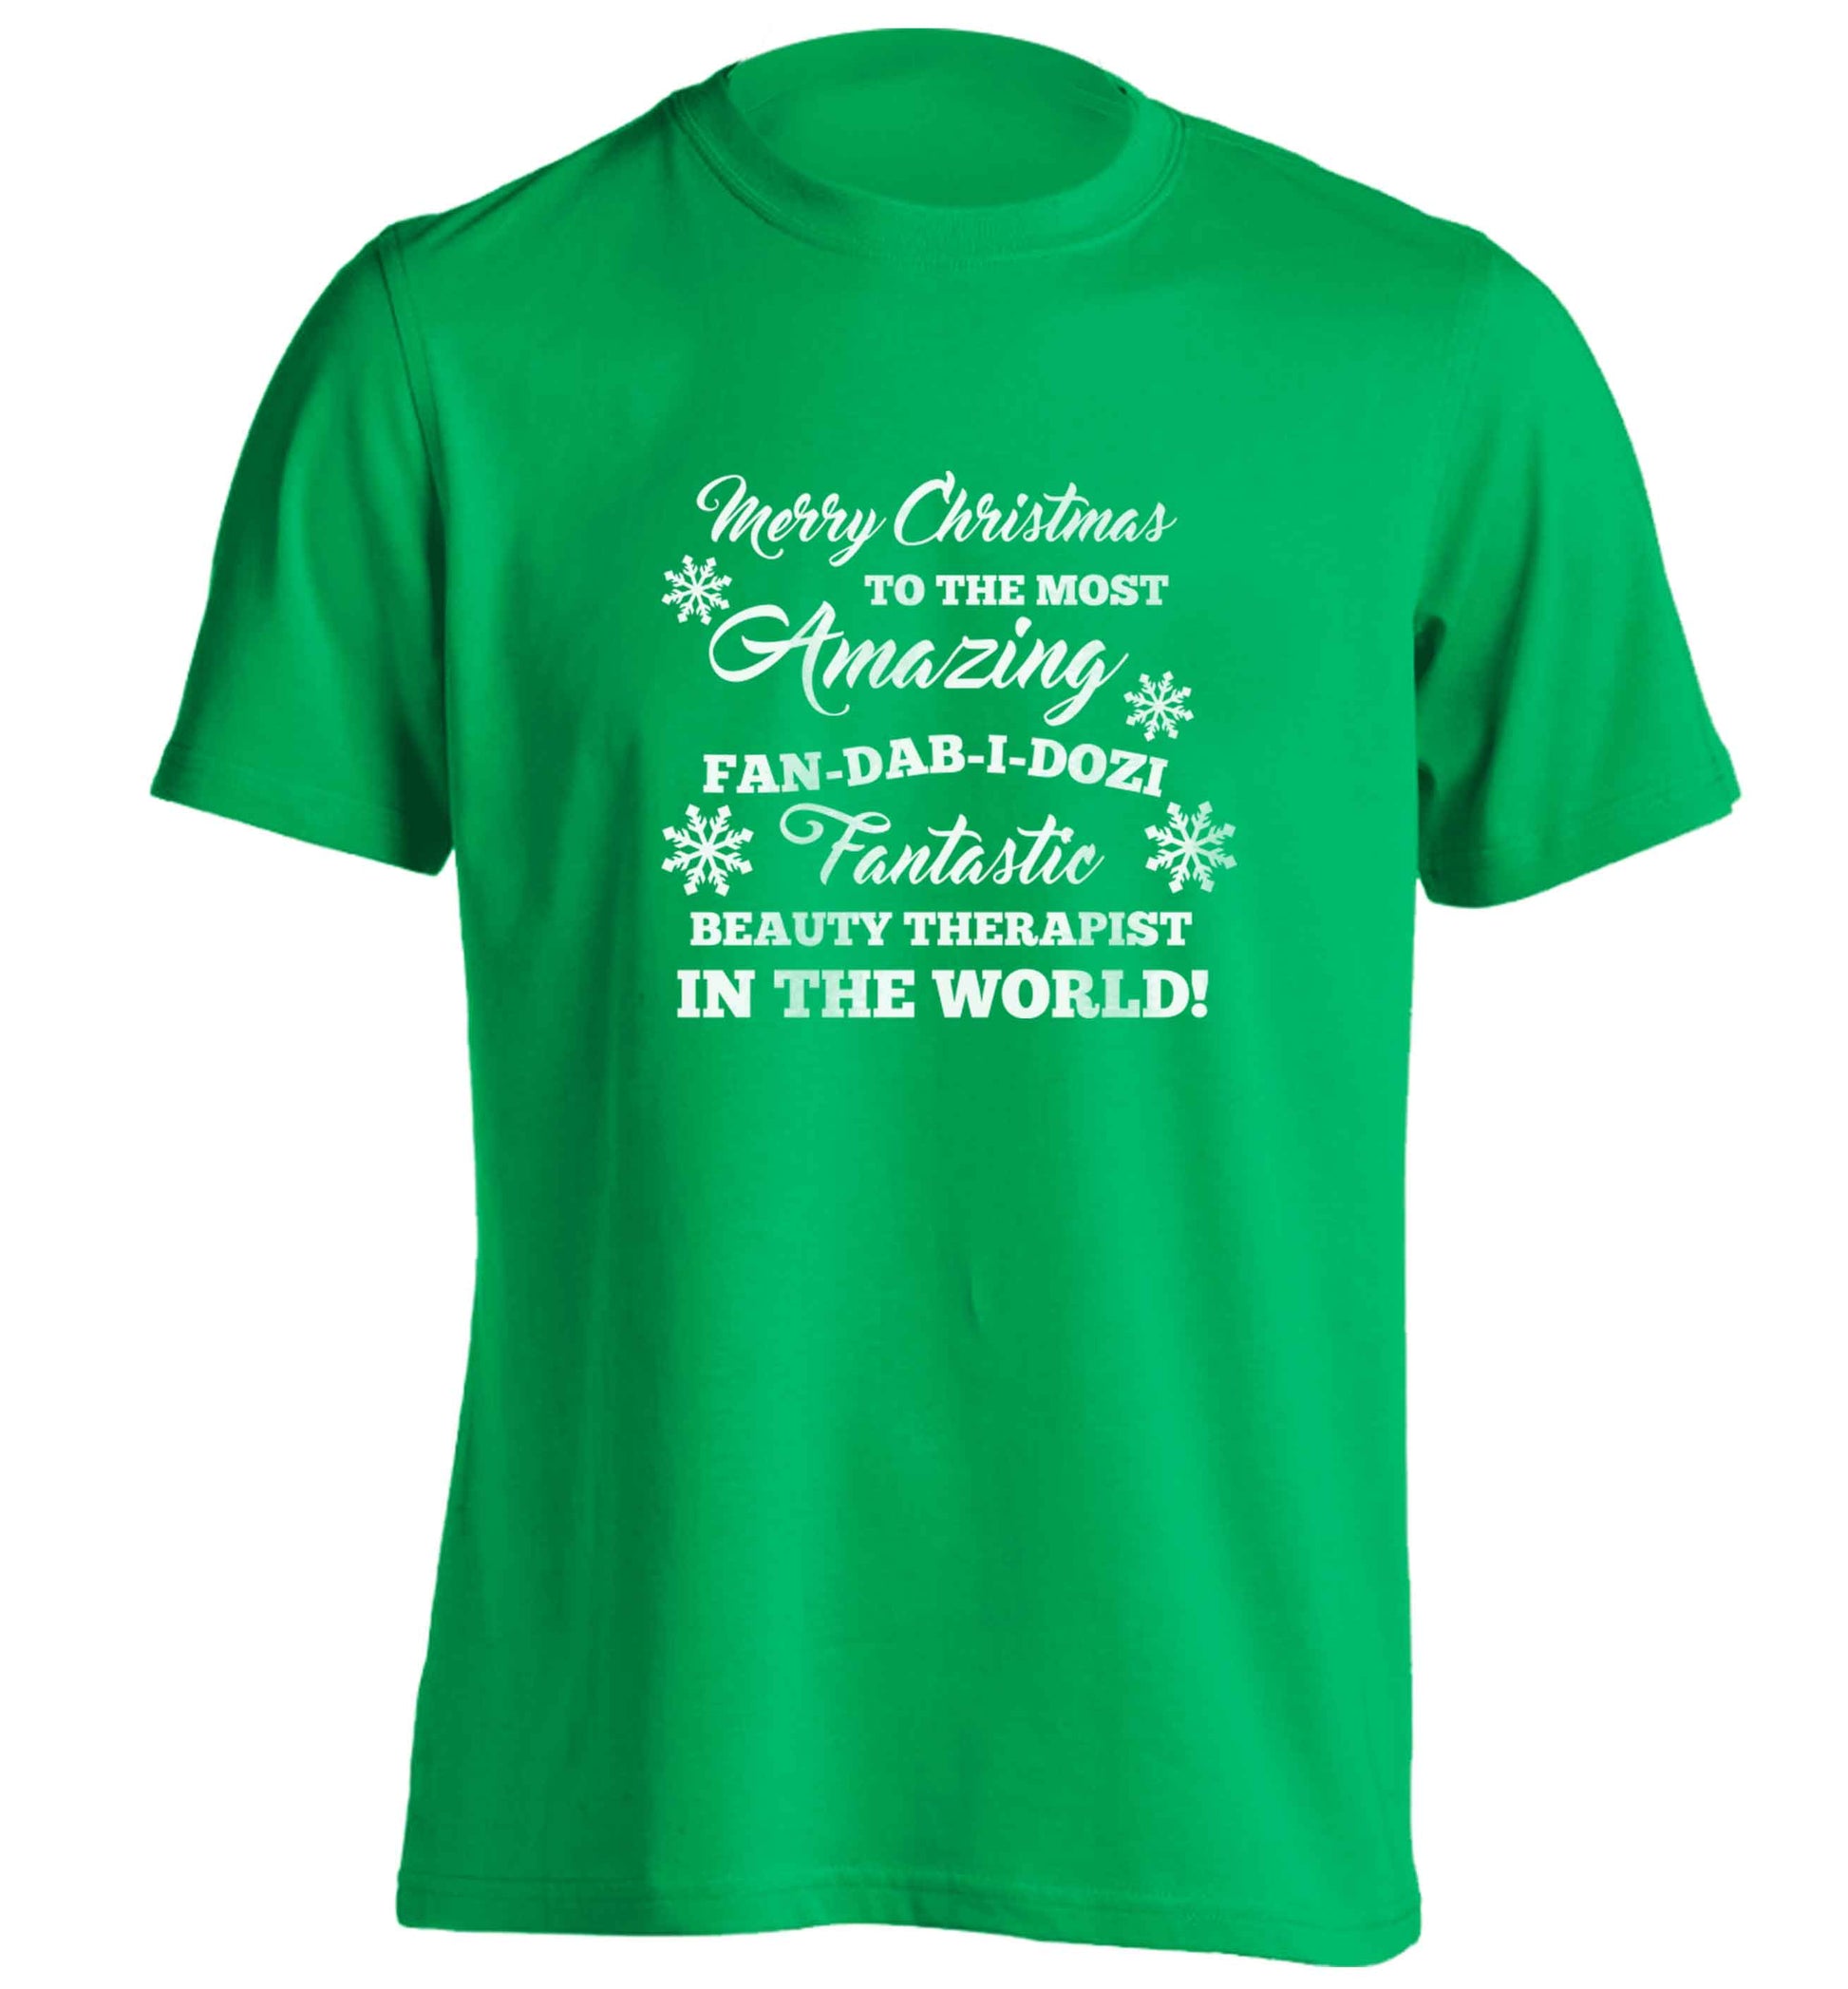 Merry Christmas to the most amazing fan-dab-i-dozi fantasic beauty therapist in the world adults unisex green Tshirt 2XL